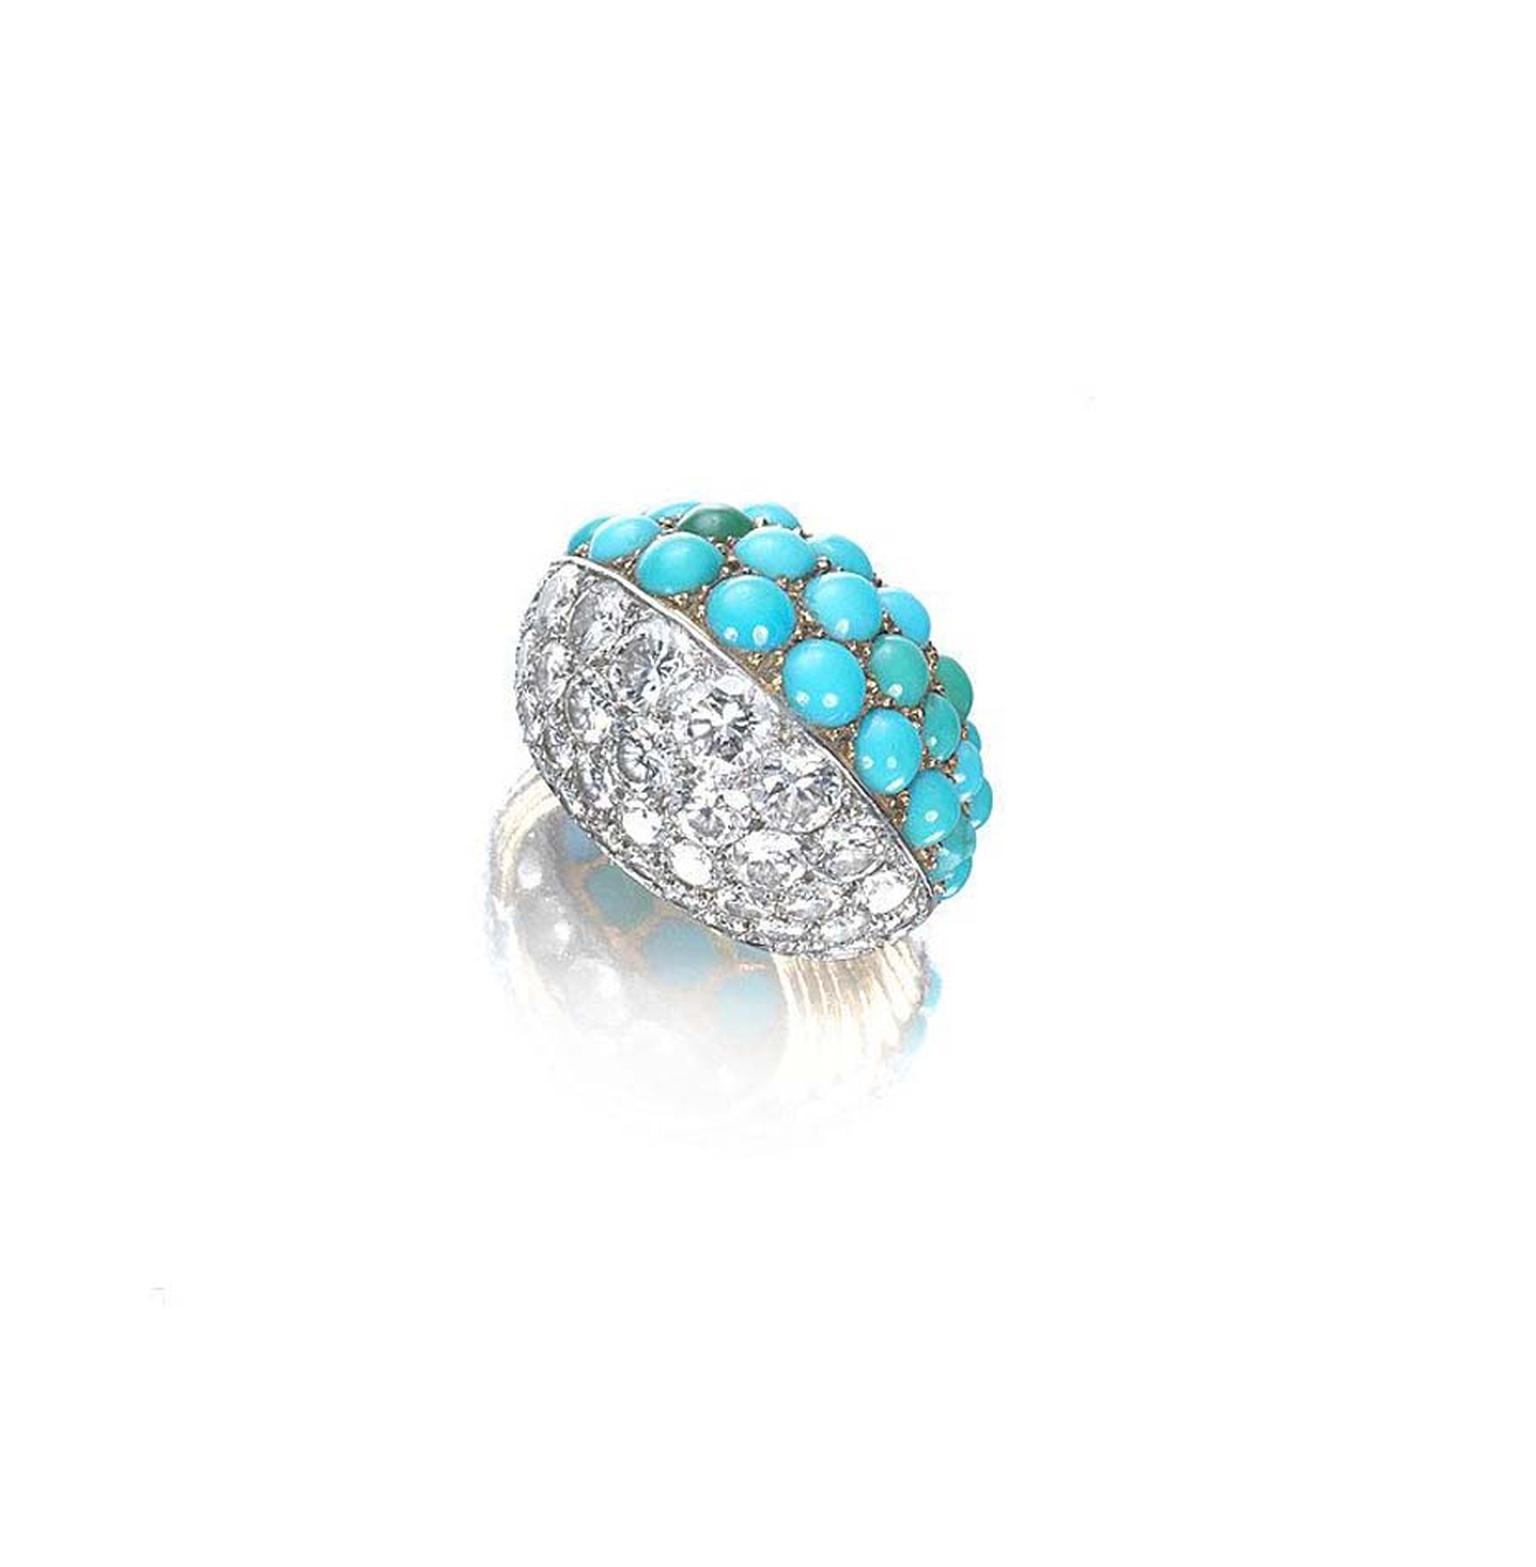 A turquoise and diamond Cartier cocktail ring circa 1960.The bombé design features pavé-set diamonds on one side and cabochon turquoise beads and brilliant-cut diamonds on the other.  The ring sold for £17,500, nearly quadruple its pre-sale estimates.